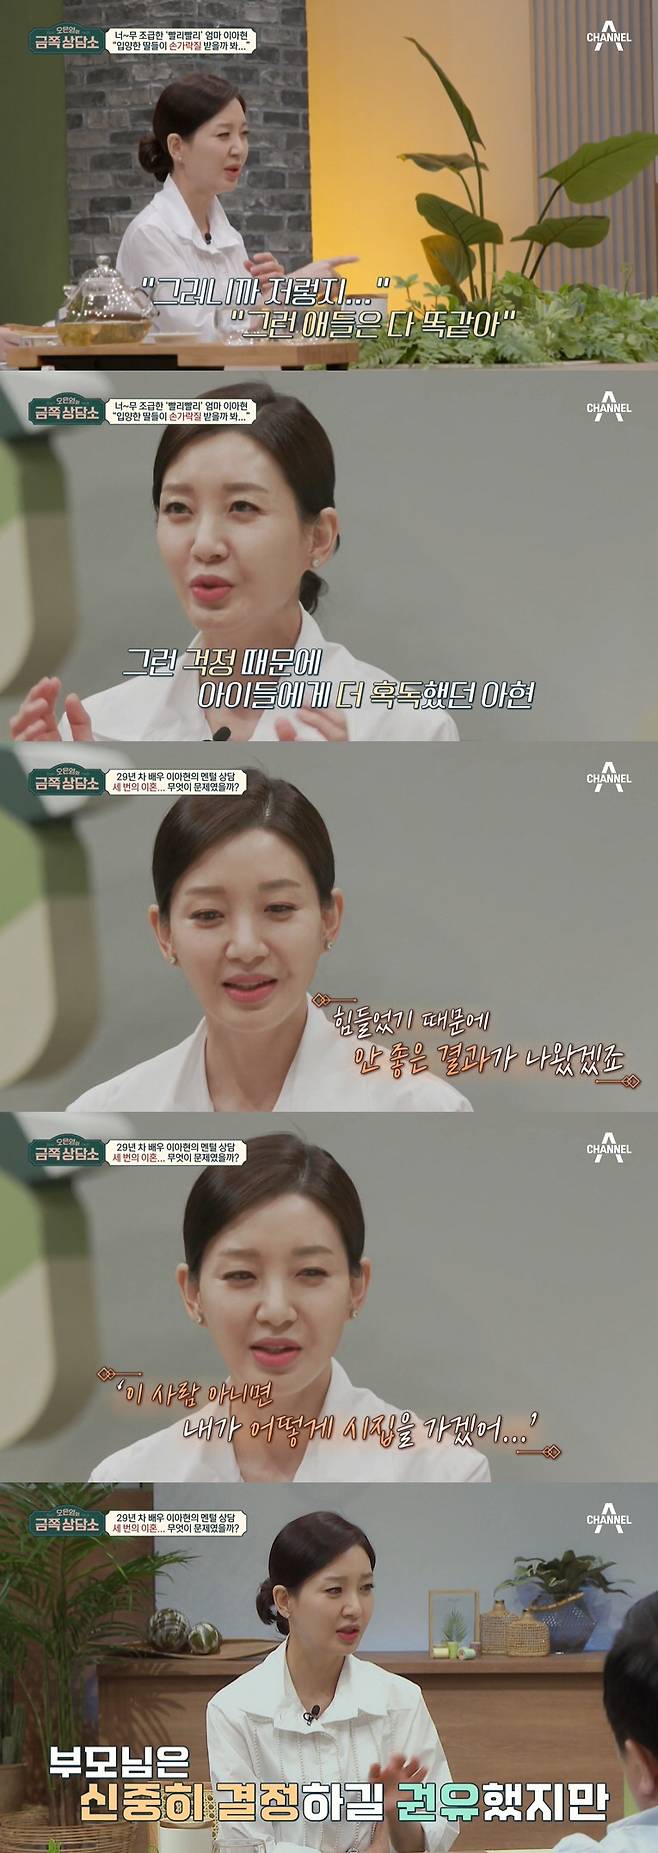 Lee Ah-hyun, a gold counselor, expressed his sorry for the adopted daughters.Actor Lee Ah-hyun appeared in the channel A entertainment program Oh Eun Youngs Golden Counseling Center on the 22nd.Lee Ah-hyeun commented on his troubles: There are so many worries; if you lie down to sleep, the star troubles do not break the tail of your tail.Lee Ah-hyun said, I am actually a little worried about what will not happen, he said. If I do not have it, my children start to worry about what will happen.I keep worrying about the future when I bite my tail on my tail. Oh Eun Young said: The treasure-like gift God gave to man is worry and anxiety.I have to protect and prepare myself to some extent. But Lee Ah-hyuns worries and anxiety are high. Lee Ah-hyun can not stay still.Lee Ah-hyun said, Im cleaning up in less than 30 minutes to watch the movie. My first daughter recently visited Korea and saw me for about two weeks.Can not you stay still? I wanted to be an adult ADHD at the time, but my daughter and mother were diagnosed by my teacher. It is harder to endure something.Oh Eun Young, who saw Lee Ah-hyeuns daily life that could not stand a dust, said, Its hard to say worry and anxiety, it seems very impatient.There is also cleanliness, but there is a lot of impatience. Three divorces and two child adoptions were also mentioned, Lee Ah-hyeun said: Isnt family members different from any other house, a lot of attention is paid to that?Those kids are all the same. I am so worried about this story that I treat my children scary to prevent it. Oh Eun Young said: The impatient nature affects interpersonal relationships a lot, I think we should expand interpersonal relationships.I think I should talk about my spouse, which is the most important object. Lee Ah-hyeun said, I think it would have been a bad result because it was hard. I thought it was a good person.I have regretted it a lot. I try not to do it now, but I seem to be repeating it. As for the reason for making a quick decision, When someone comes to me, I think it is easy to decide who else likes me other than this person.I defended that I did not even ask you to think about it again at home. My spouse may have had a hard time. Oh Eun Young said, If you repeat your experiences several times, it is common for learning to happen and make the next developed choice.But I would like to experience the painful results repeatedly about the problem of marriage. Lee Ah-hyun pondered that he believed in people immediately and that he was not patient.Lee Ah-hyun said, I grew up normal, I am strange. I learned everything I wanted to learn. Before vocal music, I went to violin, piano and study in the United States.I think he was greedy, he said.Oh Eun Young said, It seems too acceptable. It is true that my parents loved it, but I have to learn patience.I do not think I had much experience to endure, Lee Ah-hyeun admitted.One of Lee Ah-hyuns worries was the economic burden: Lee Ah-hyun said, I wouldnt worry alone, but I should be backing up the children.I think a lot about how to live without me. The end of worry is that idea. Lee Ah-hyun said,  (The children) I was able to go to a harmonious house with my mother and father, but I am sorry that I would have shared my pain that I do not have to meet with me.I always want to be better for my children because I am always inside. Oh Eun Young said, Happiness is not a physical condition. It is not a happy thing because physical conditions are provided.The children are loving because their mother is Lee Ah-hun, Lee Ah-hyun comforted.